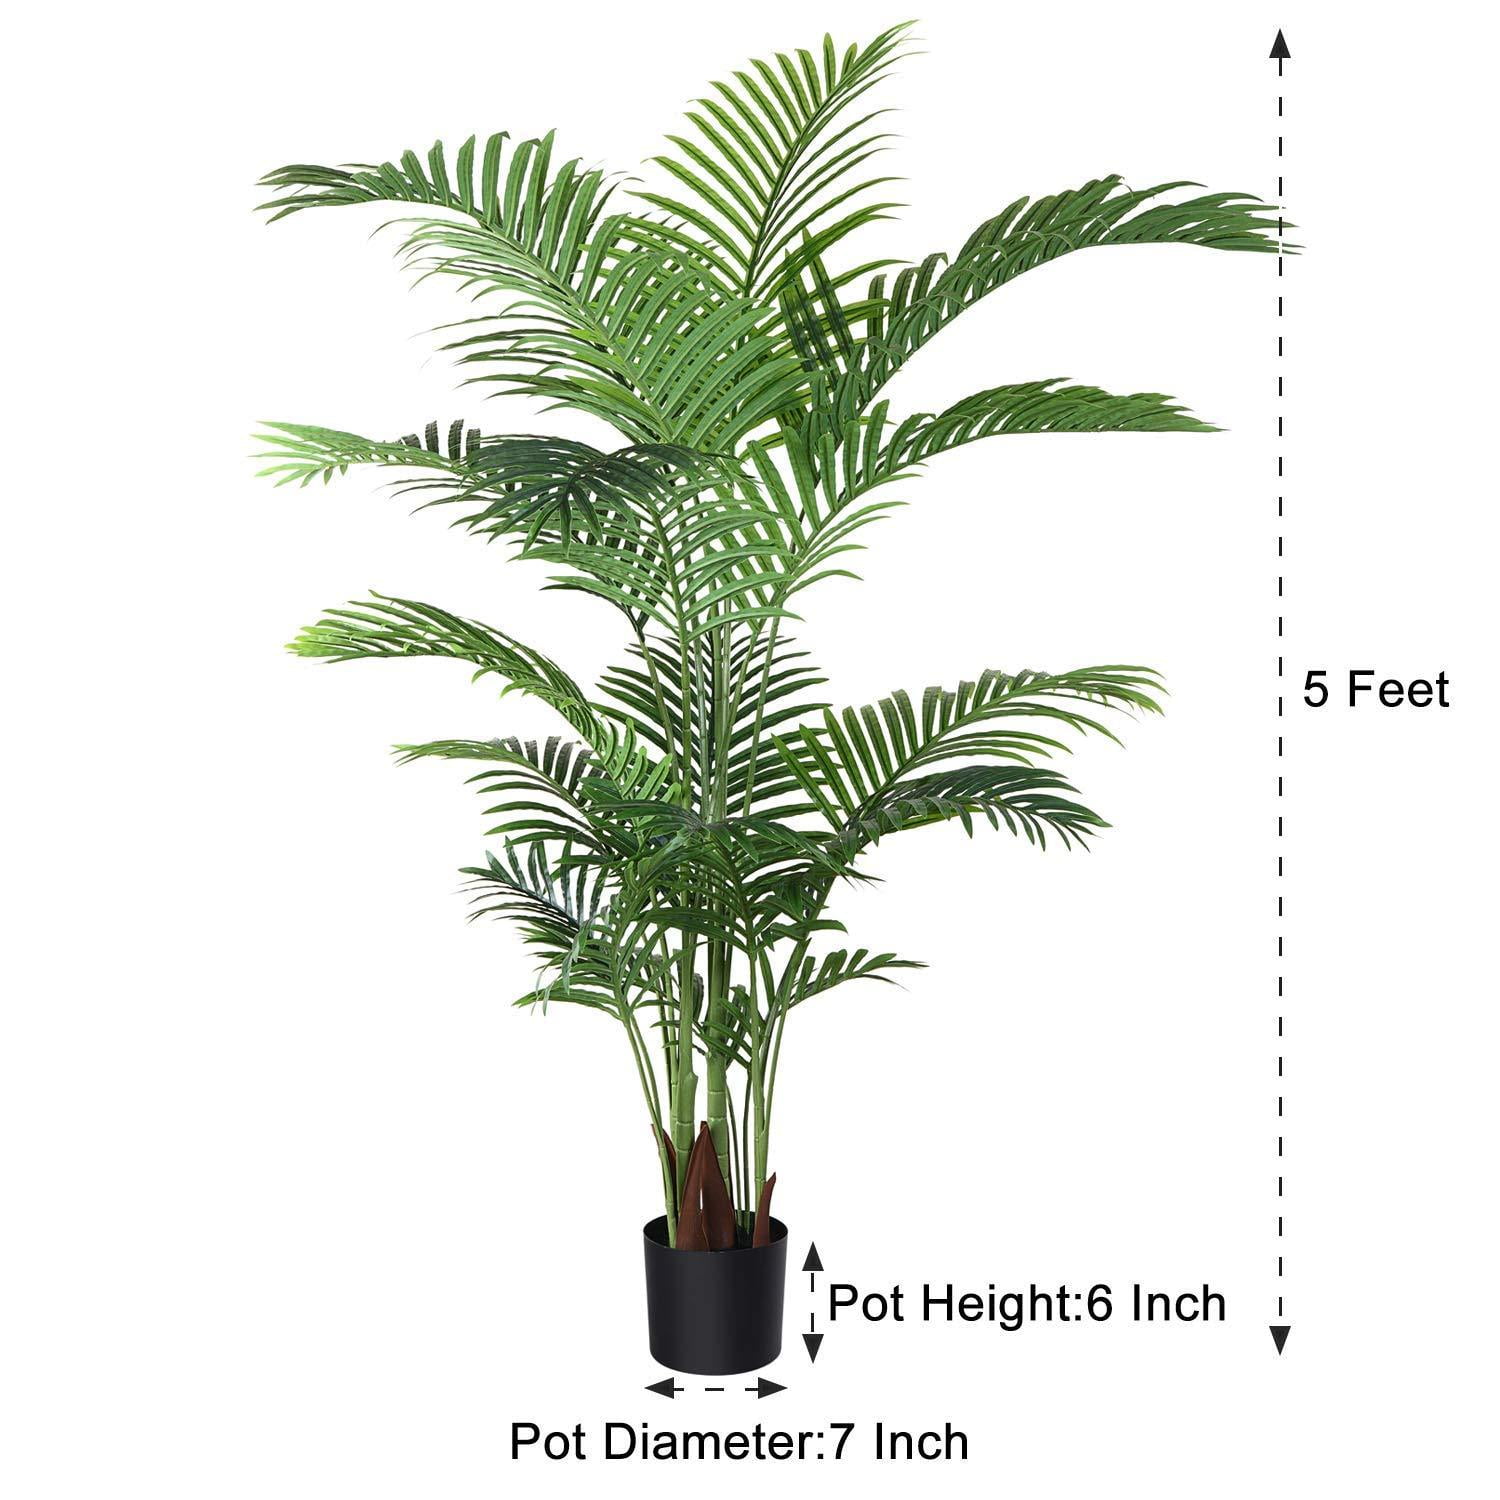 Artiflr 2 Pack Artificial Areca Palm Plant 5.2 Feet Fake Palm Tree with 17 Trunks Faux Tree for Indoor Outdoor Modern Decoration Feaux Dypsis Lutescens Plants in Pot for Home Office 